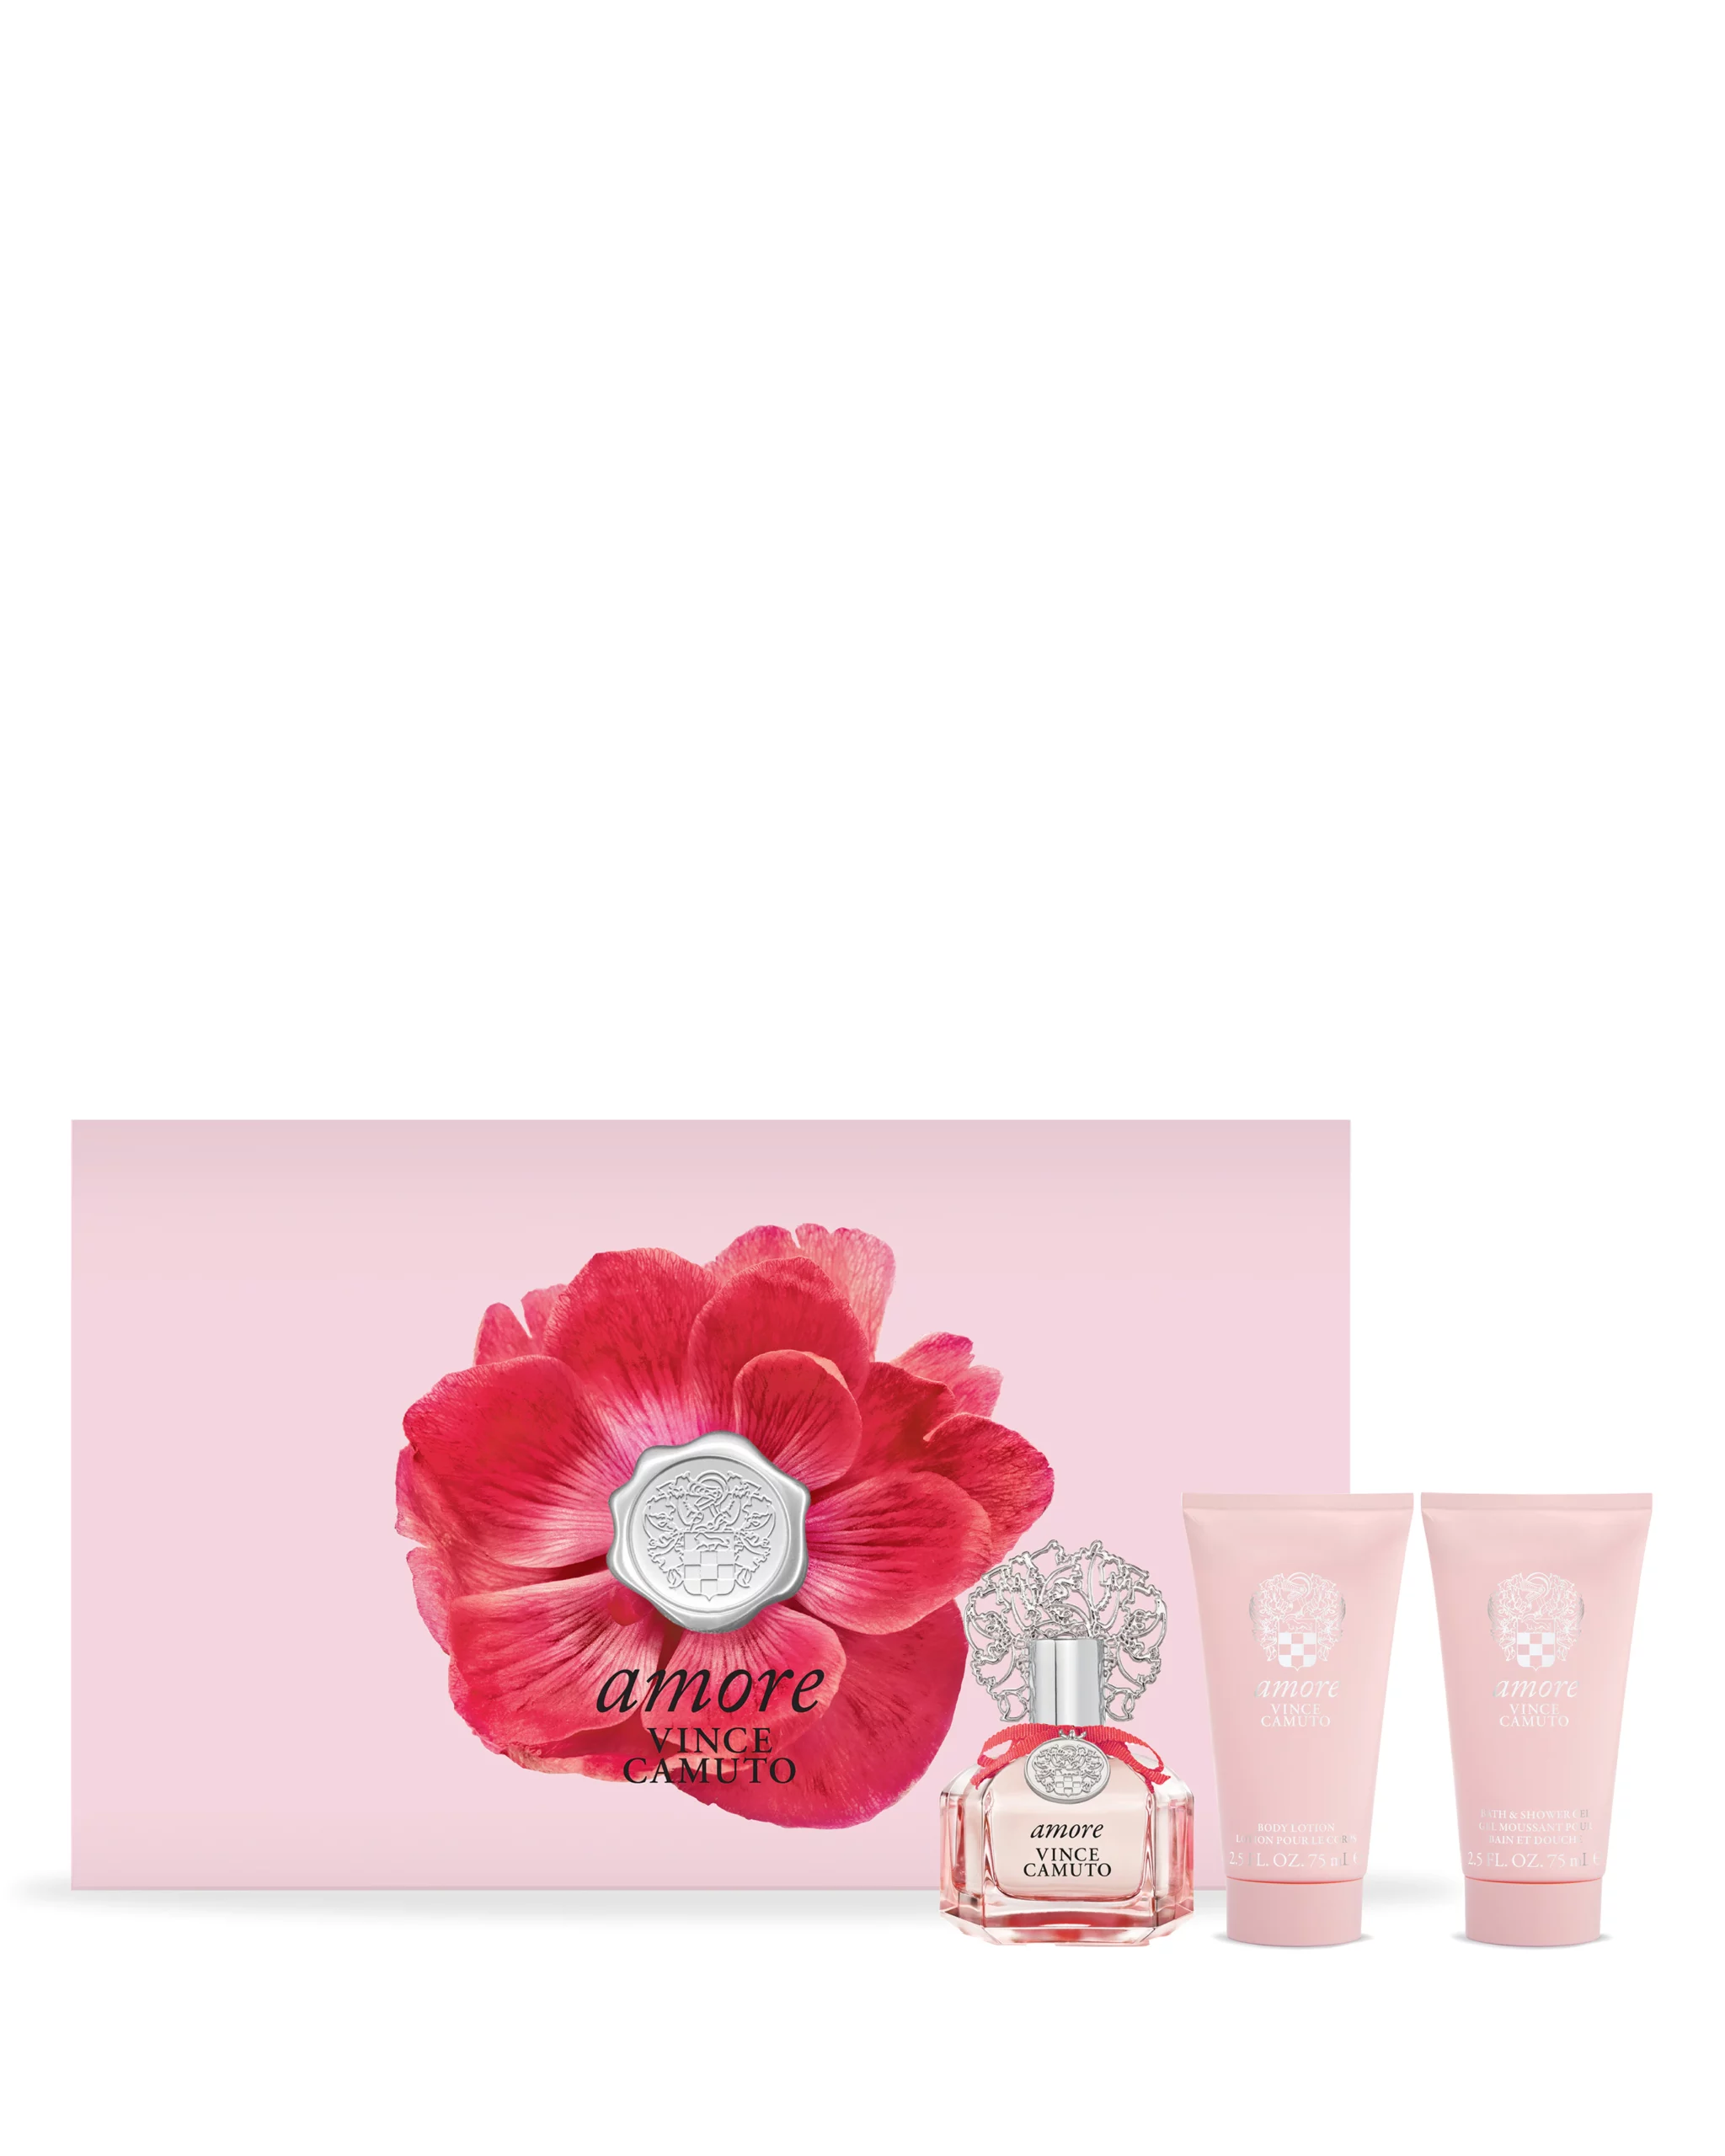 Vince Camuto Amore 3pc Gift Set Women – Perfume Dazzle